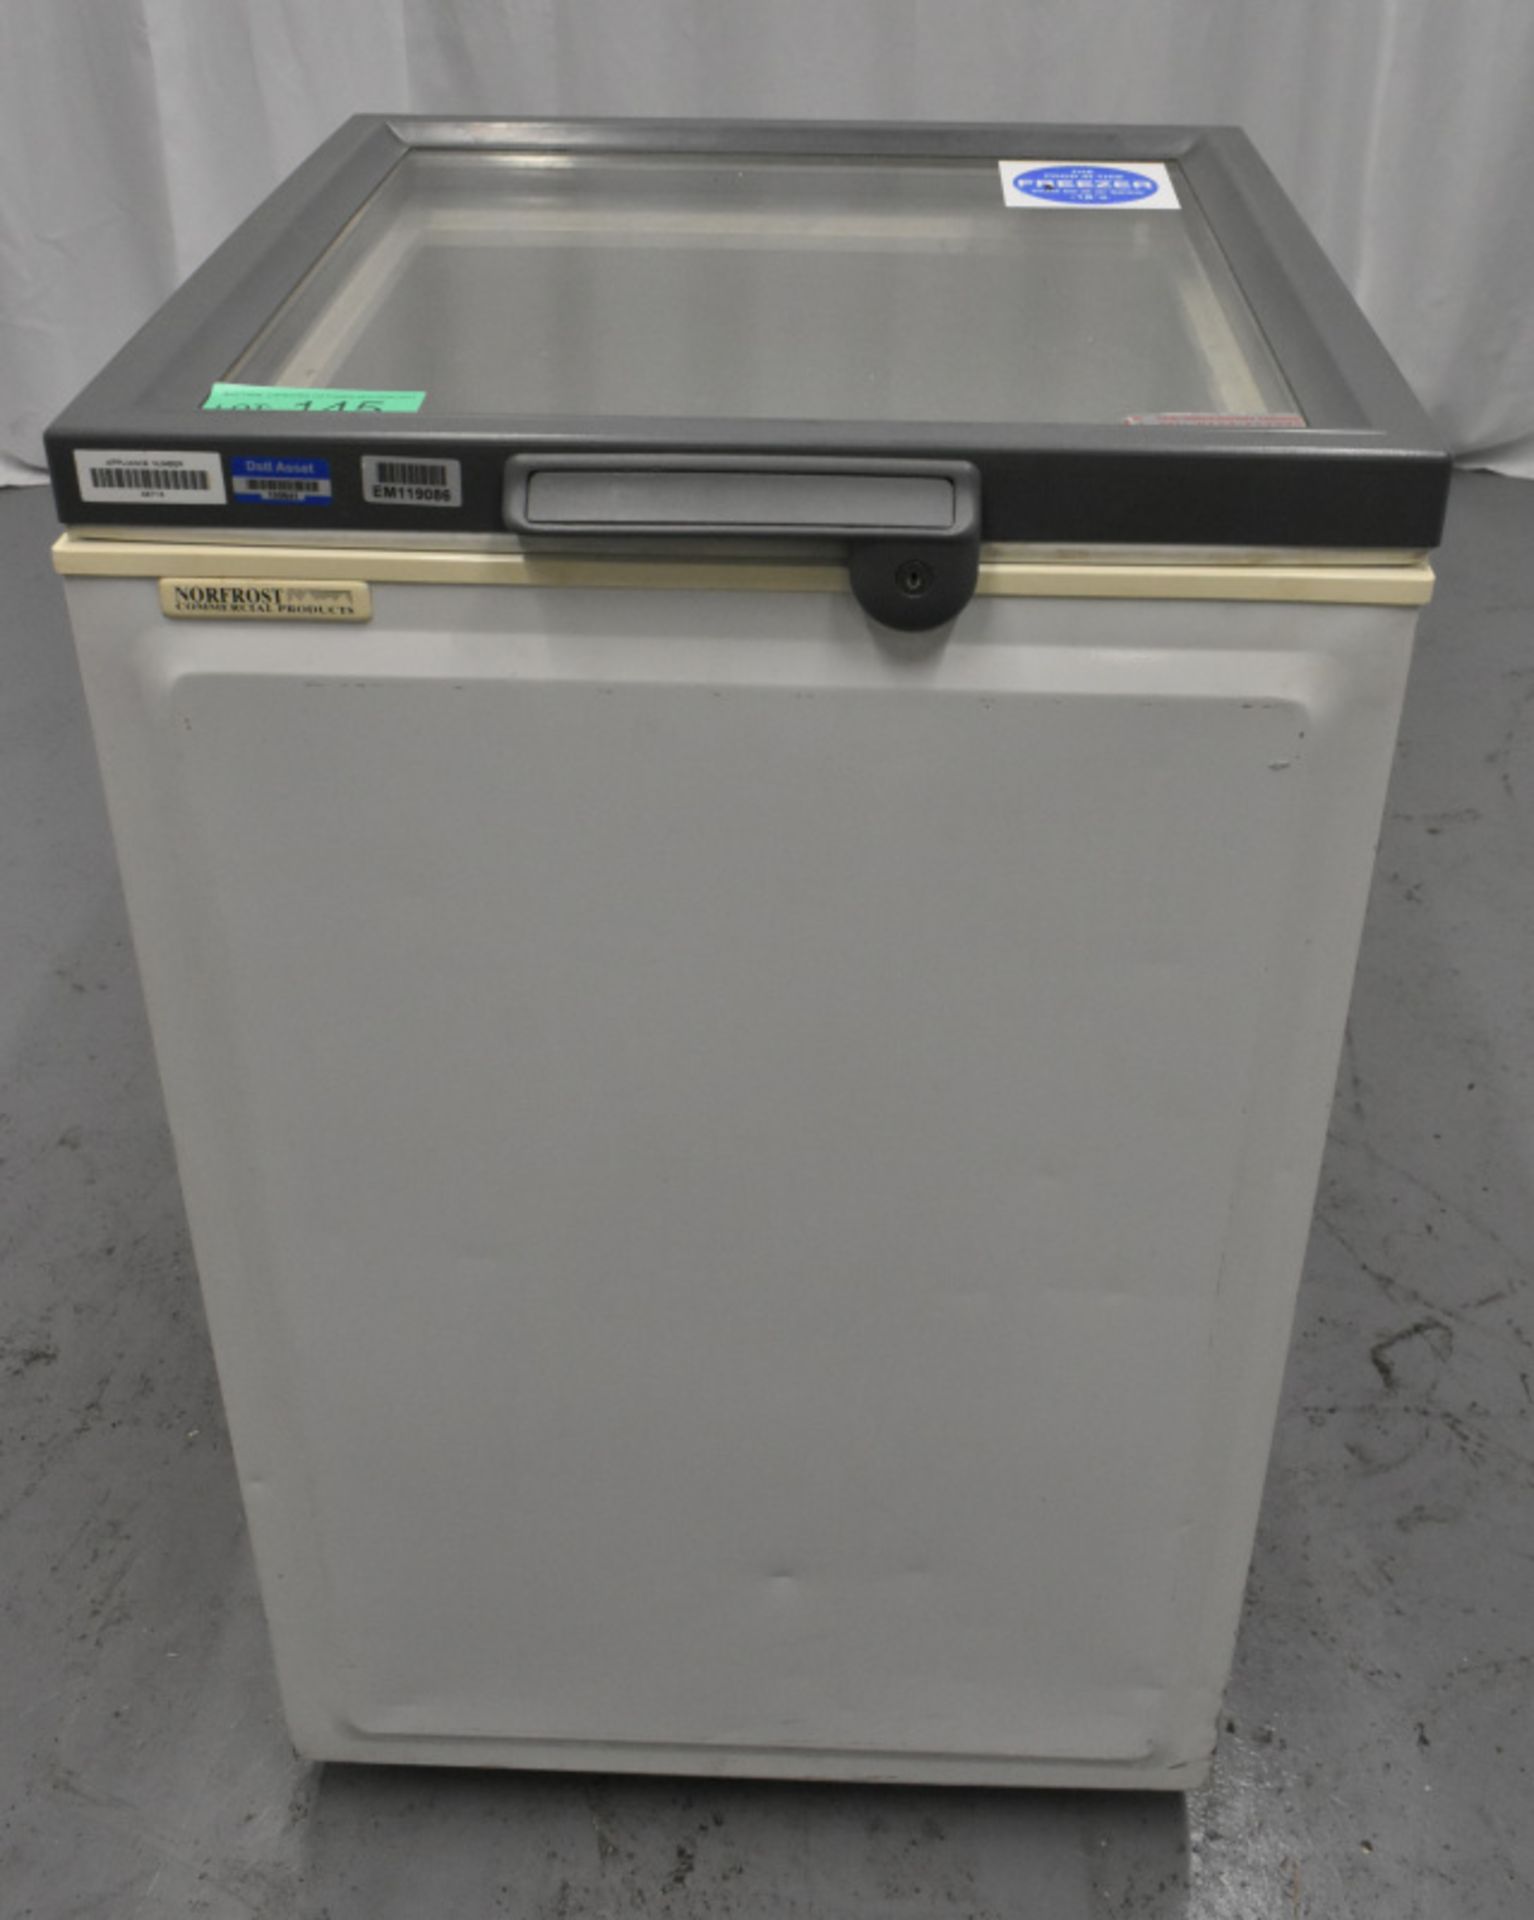 Norfrost Deep Freezer with glass top - Model MCF100G Serial No.1395/0046530 - L550 x W600